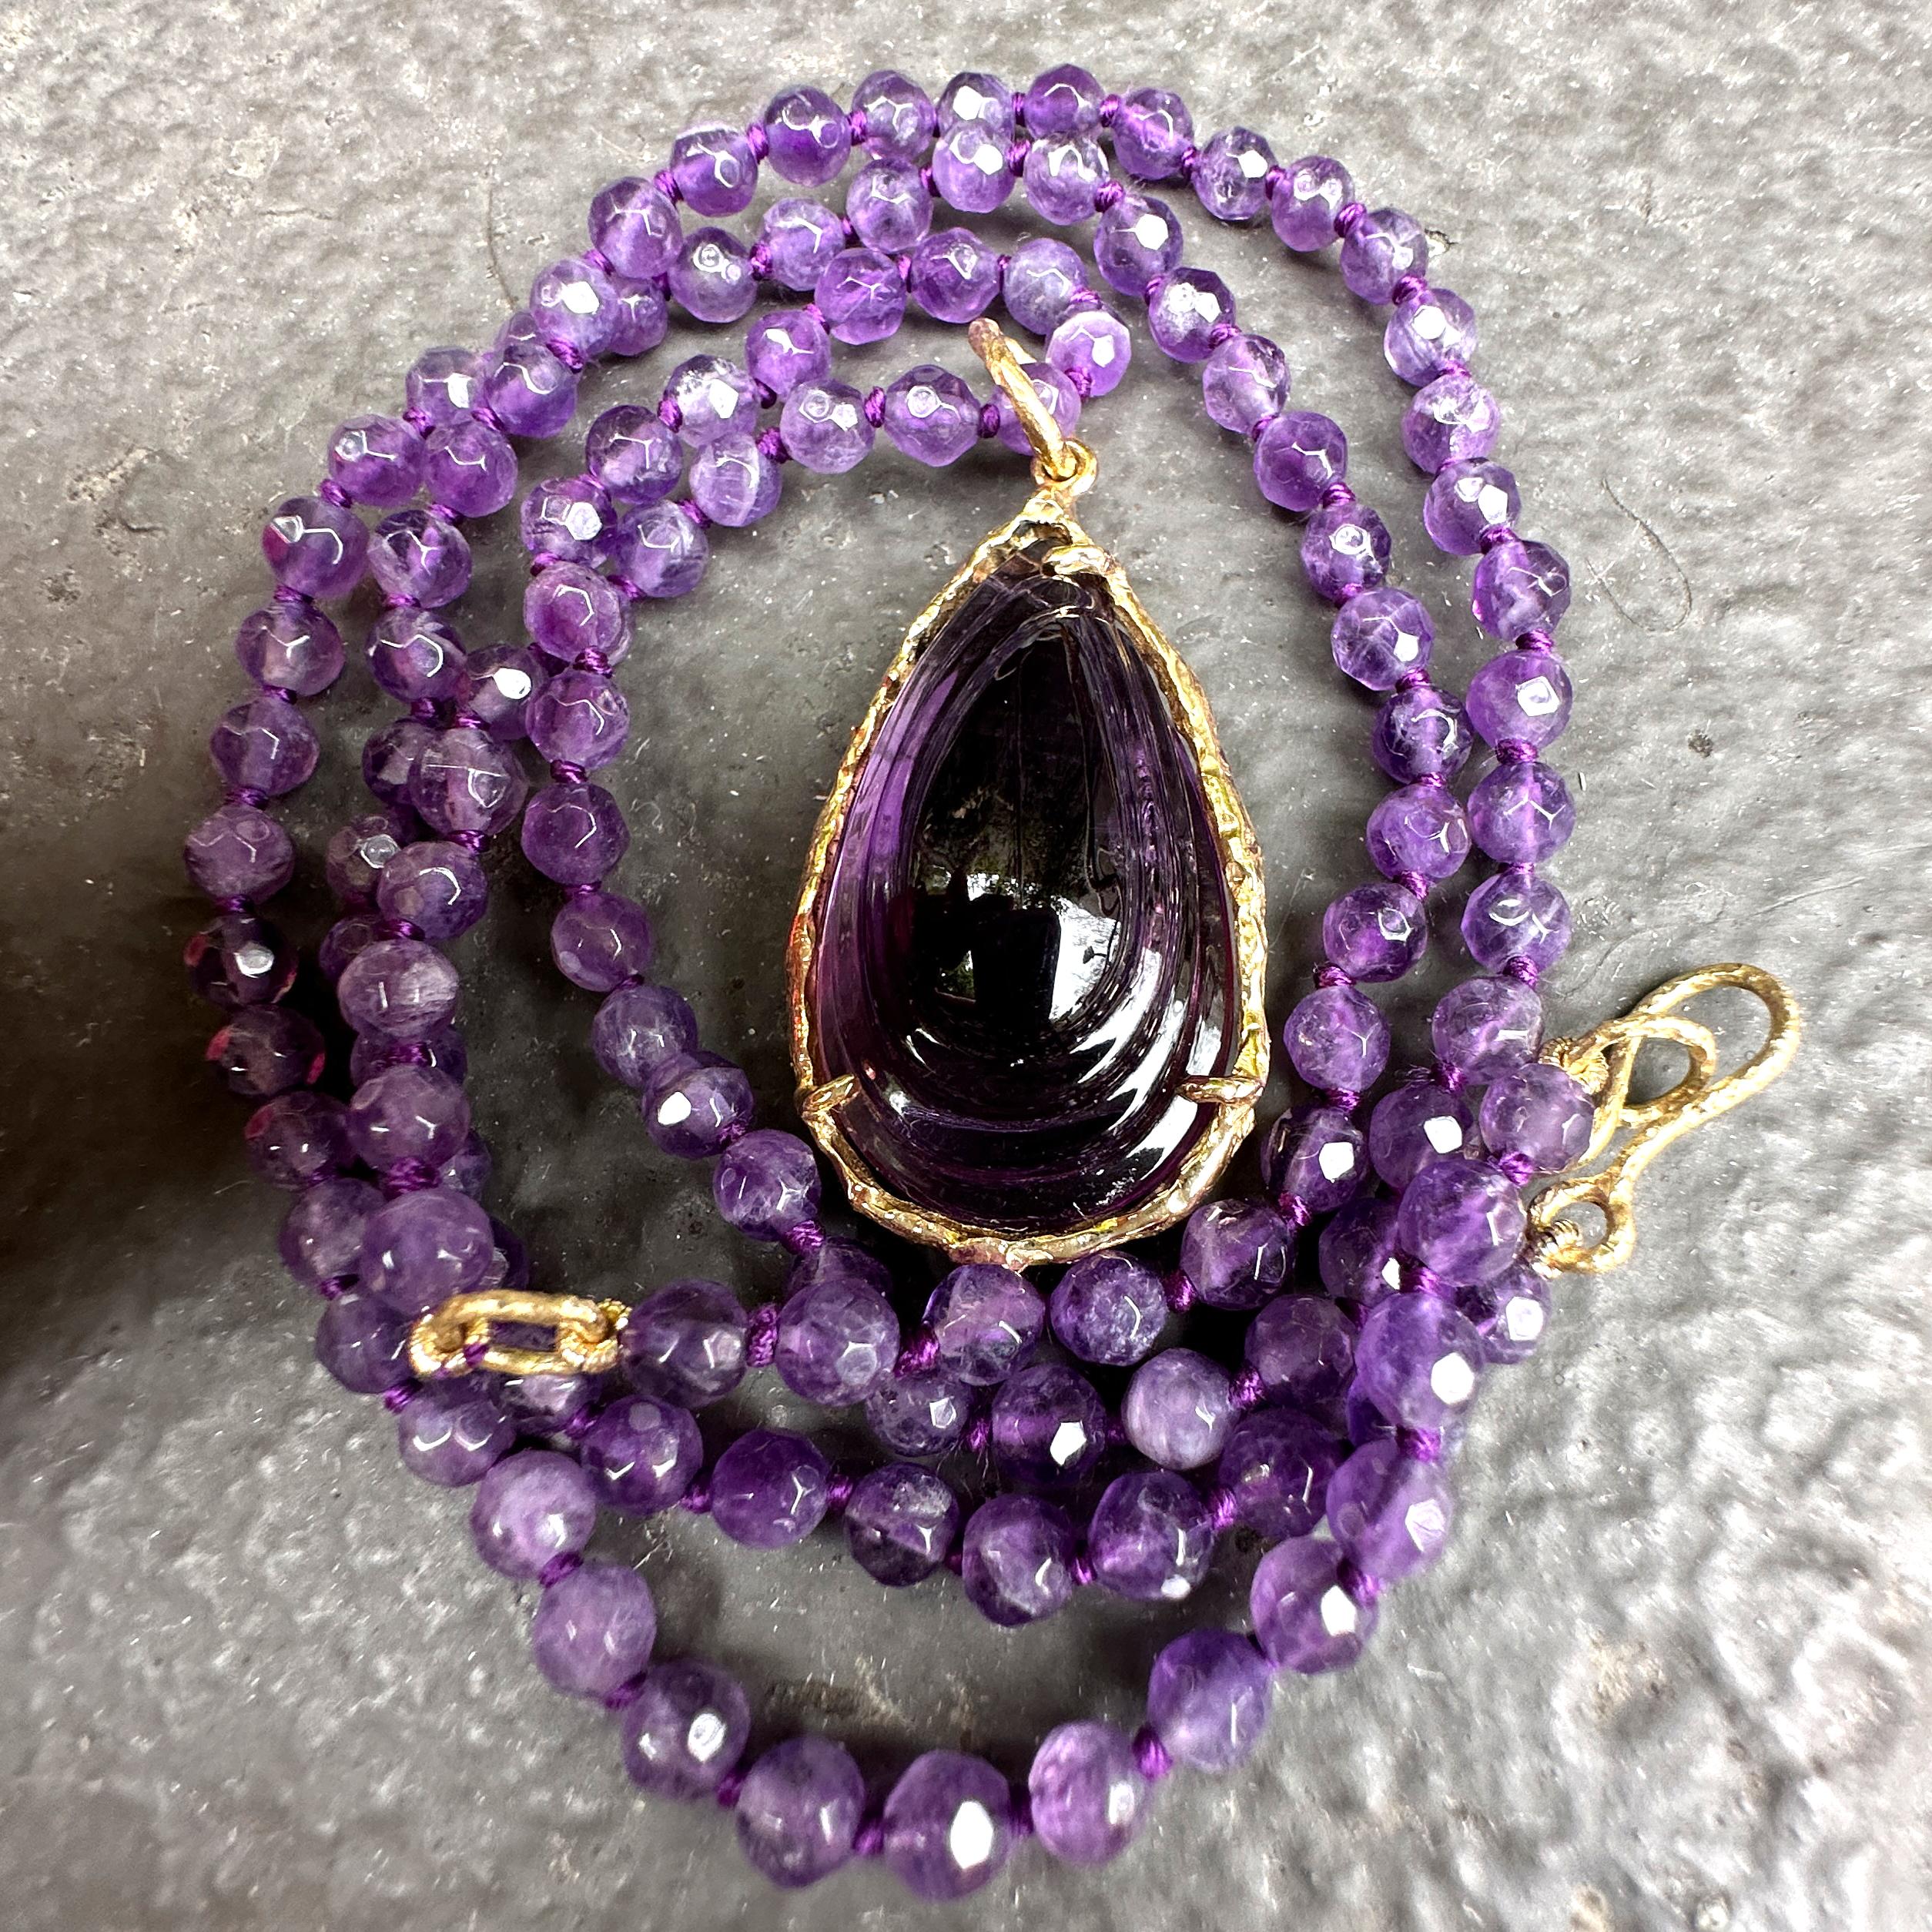 39 Carat Carved Amethyst Pendant in 18K Gold on Convertible Amethyst Bead Chain For Sale 7